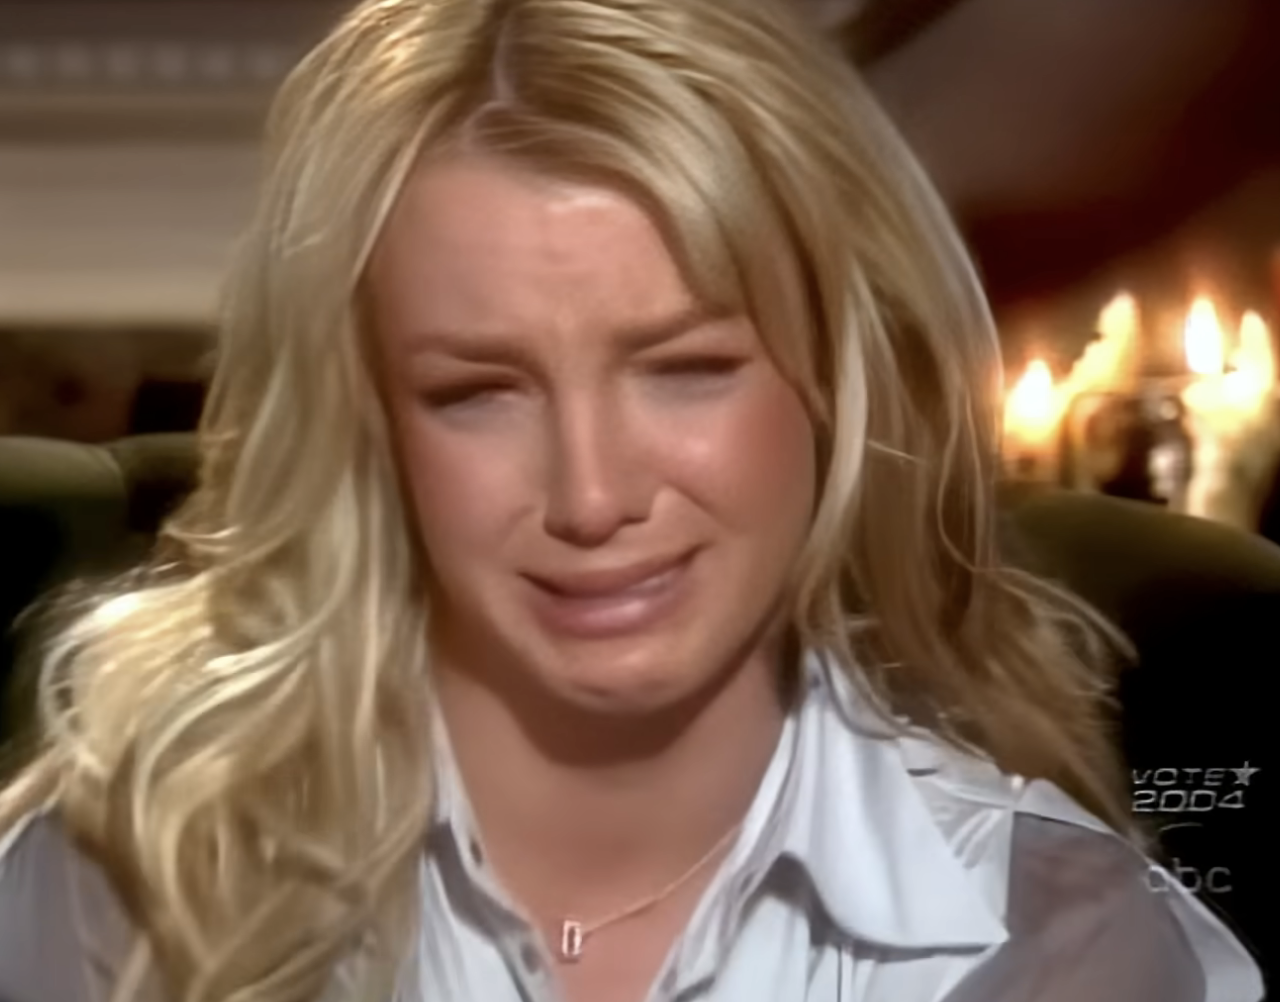 clooseup of britney crying